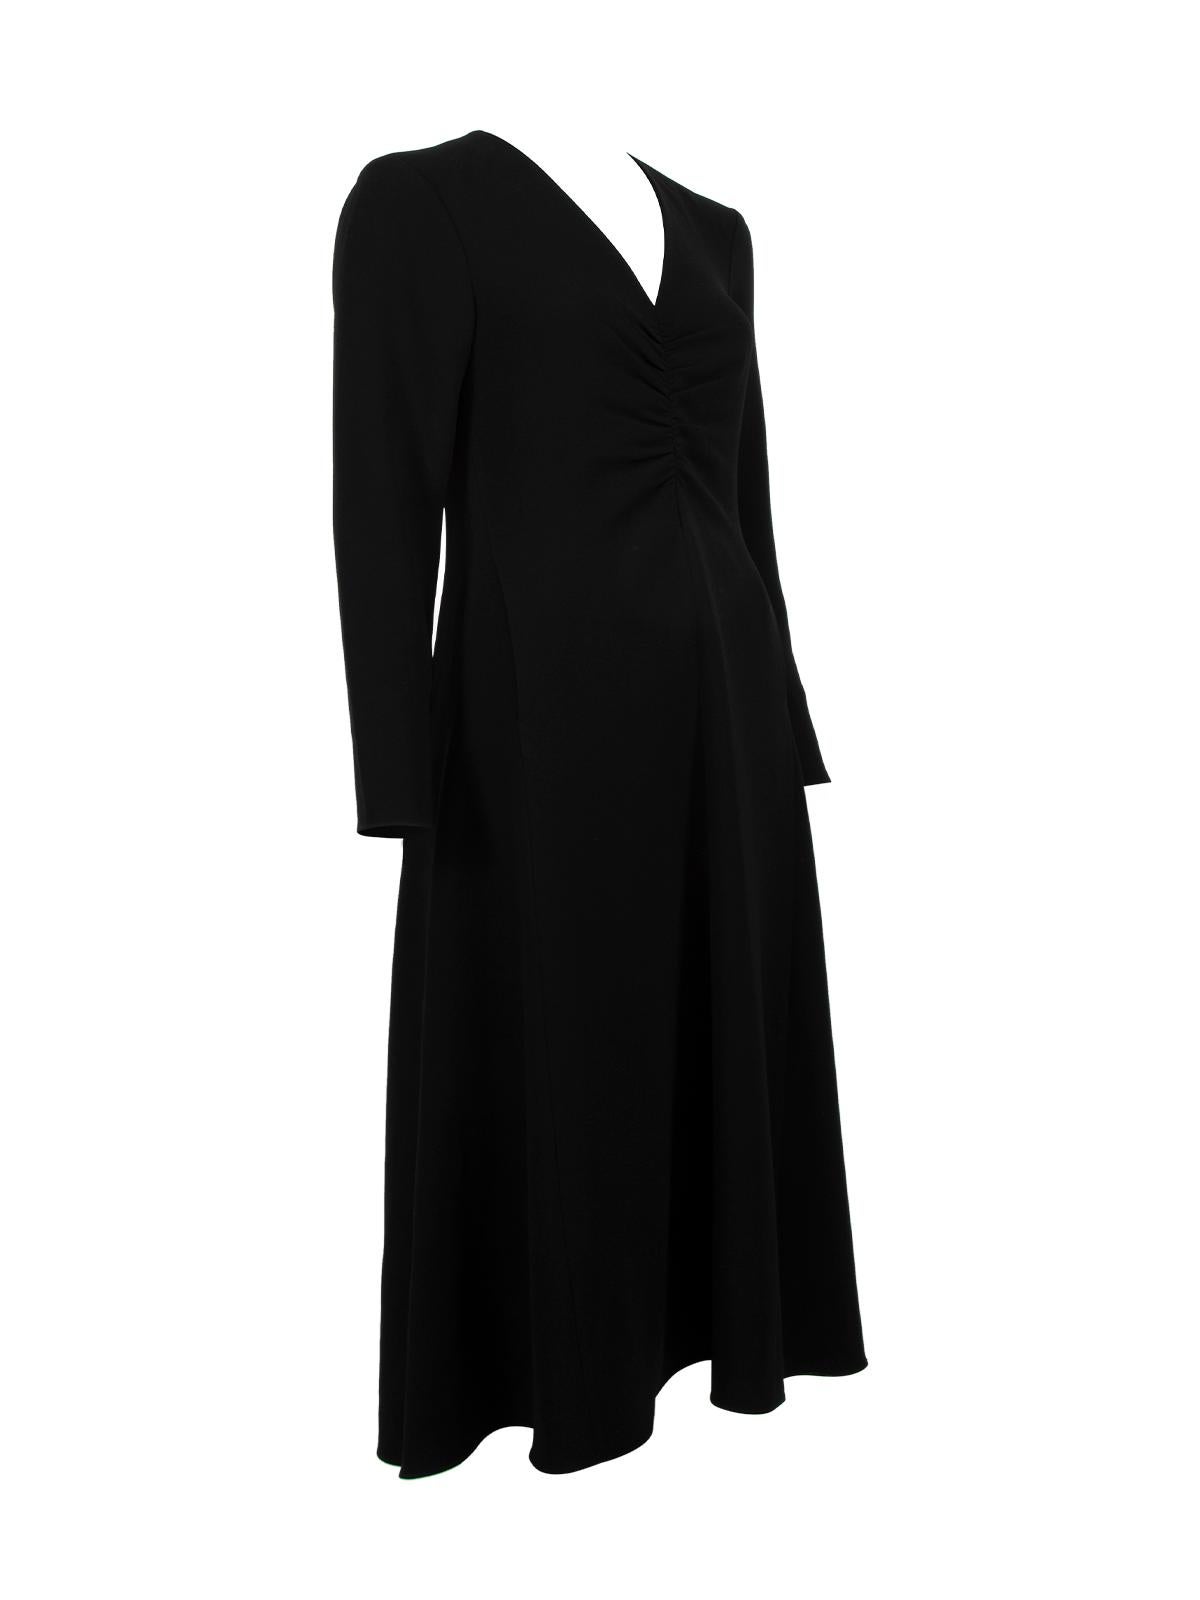 CONDITION is Very good. Hardly any visible wear to dress is evident on this used Tibi designer resale item. Details Black V Neck Long sleeves Silk Midi Made in CHINA Composition 100% SILK Care instructions: Professional dry clean only Size & Fit